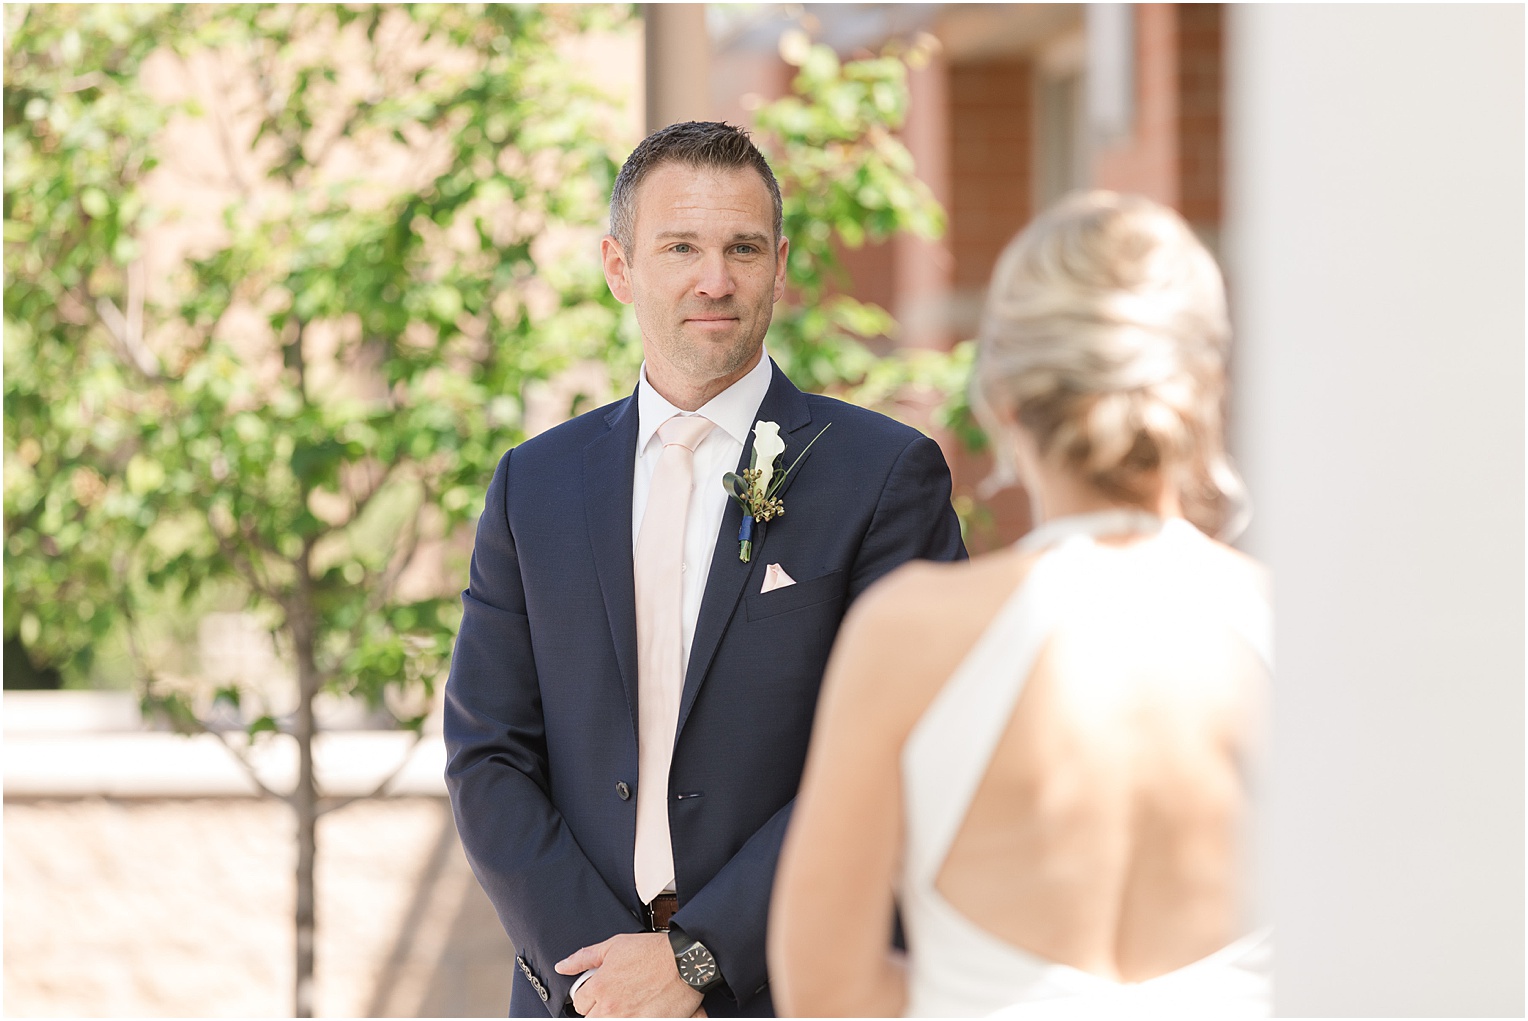 Kansas City Wedding at Union Horse Distilling Co. Danielle + Brandon Neutral White and Navy Spring wedding bride and groom first look